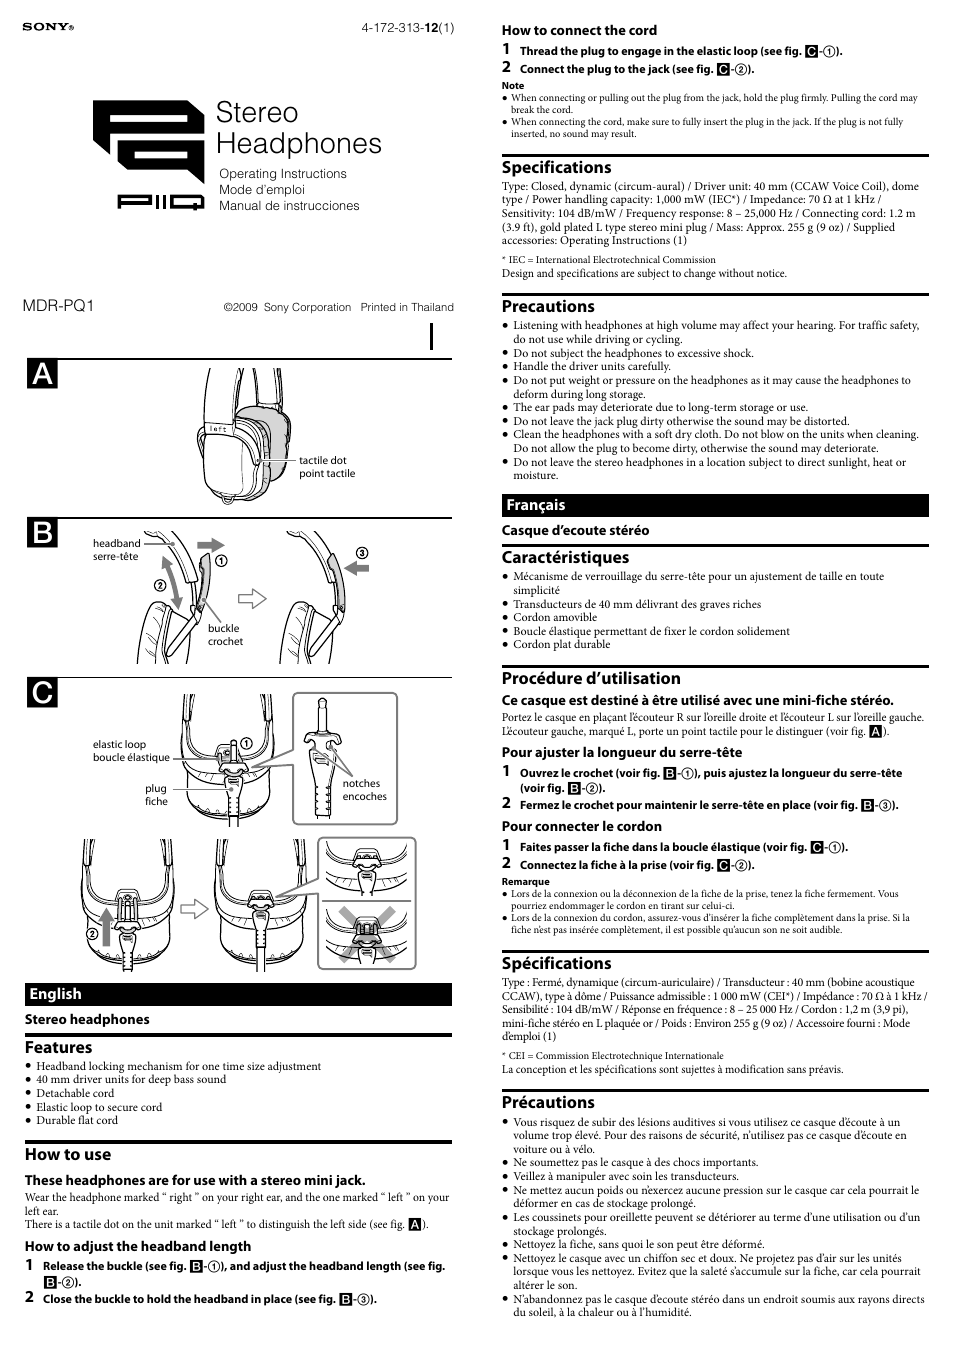 Sony MDR-PQ1 User Manual | 2 pages